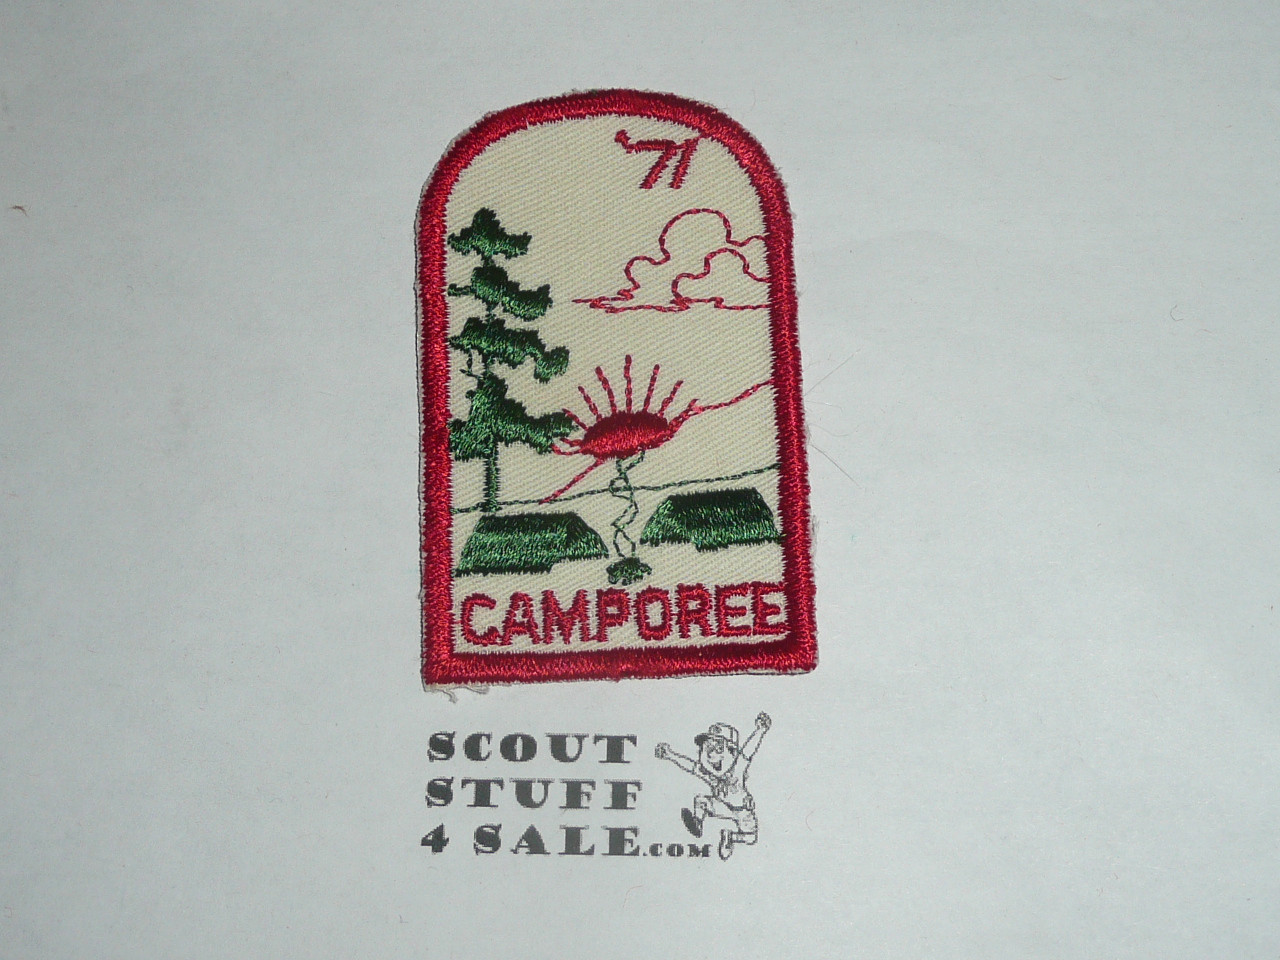 1971 Camporee Patch, Generic BSA issue, wht twill, red c/e bdr